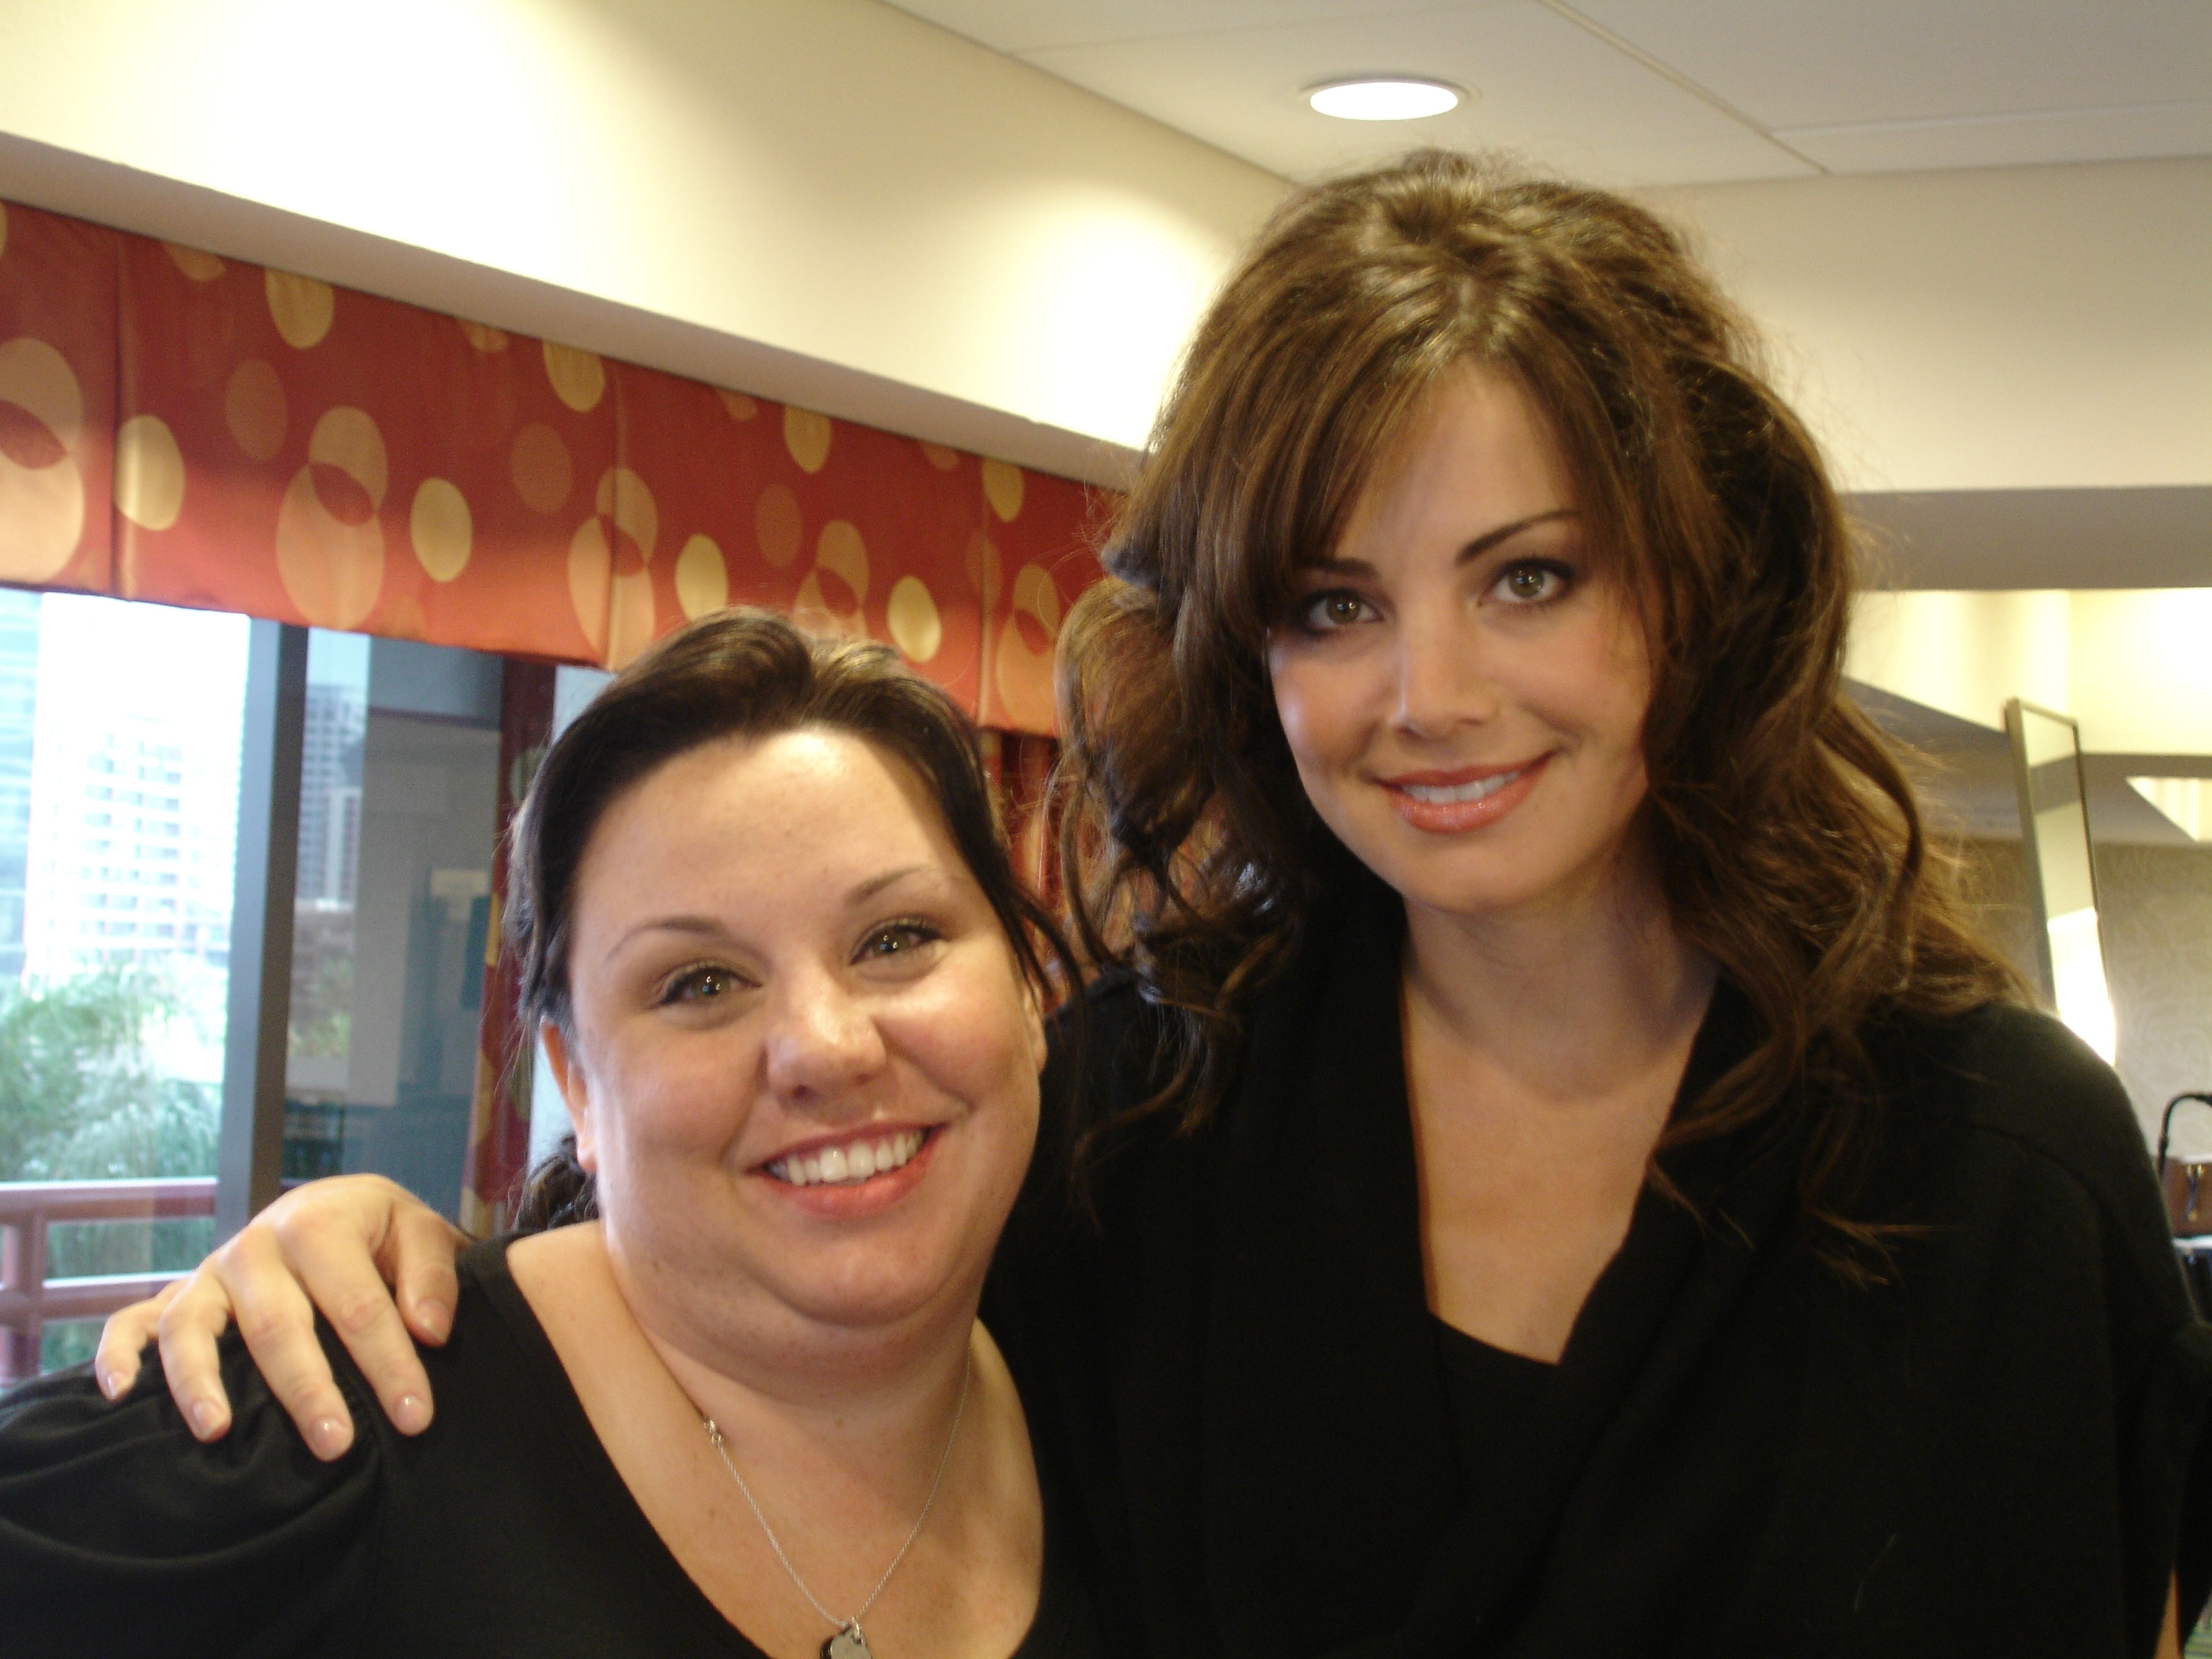 Hair erica durance Everything you